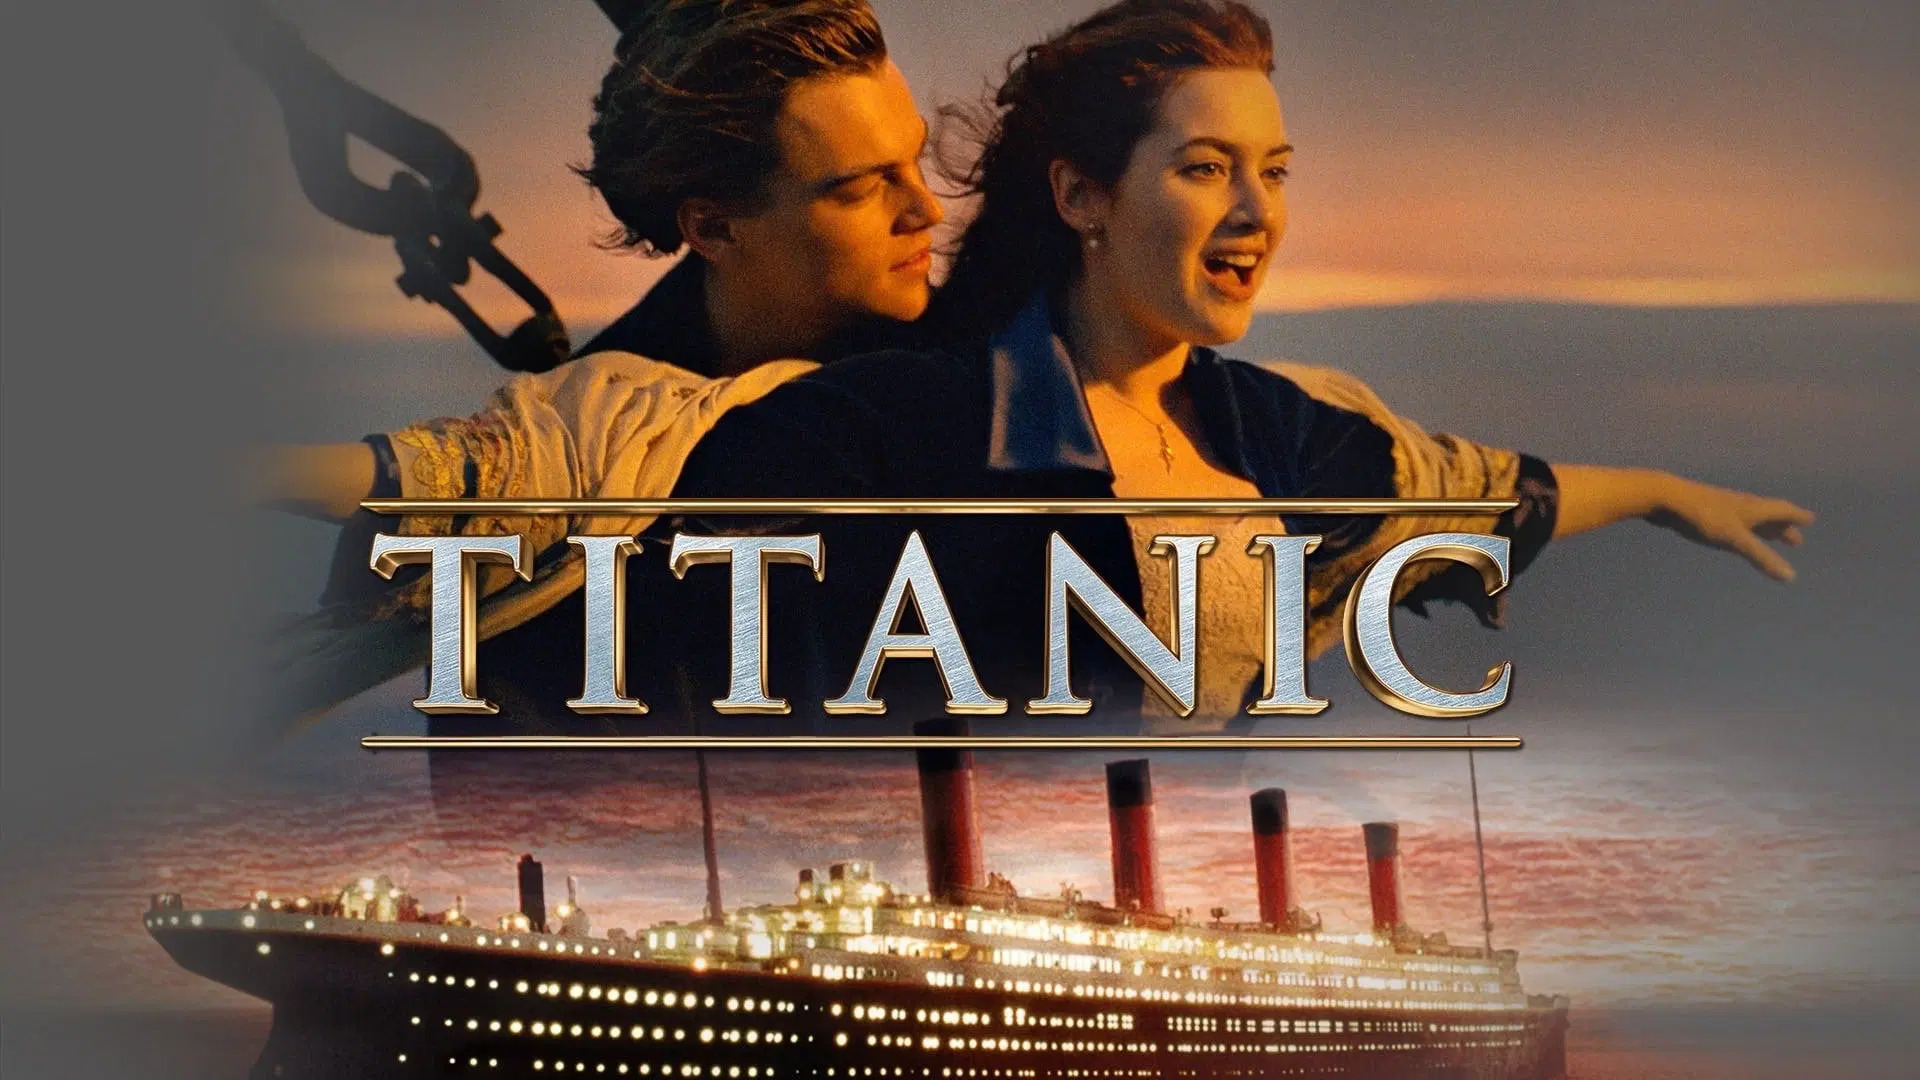 37-facts-about-the-movie-titanic